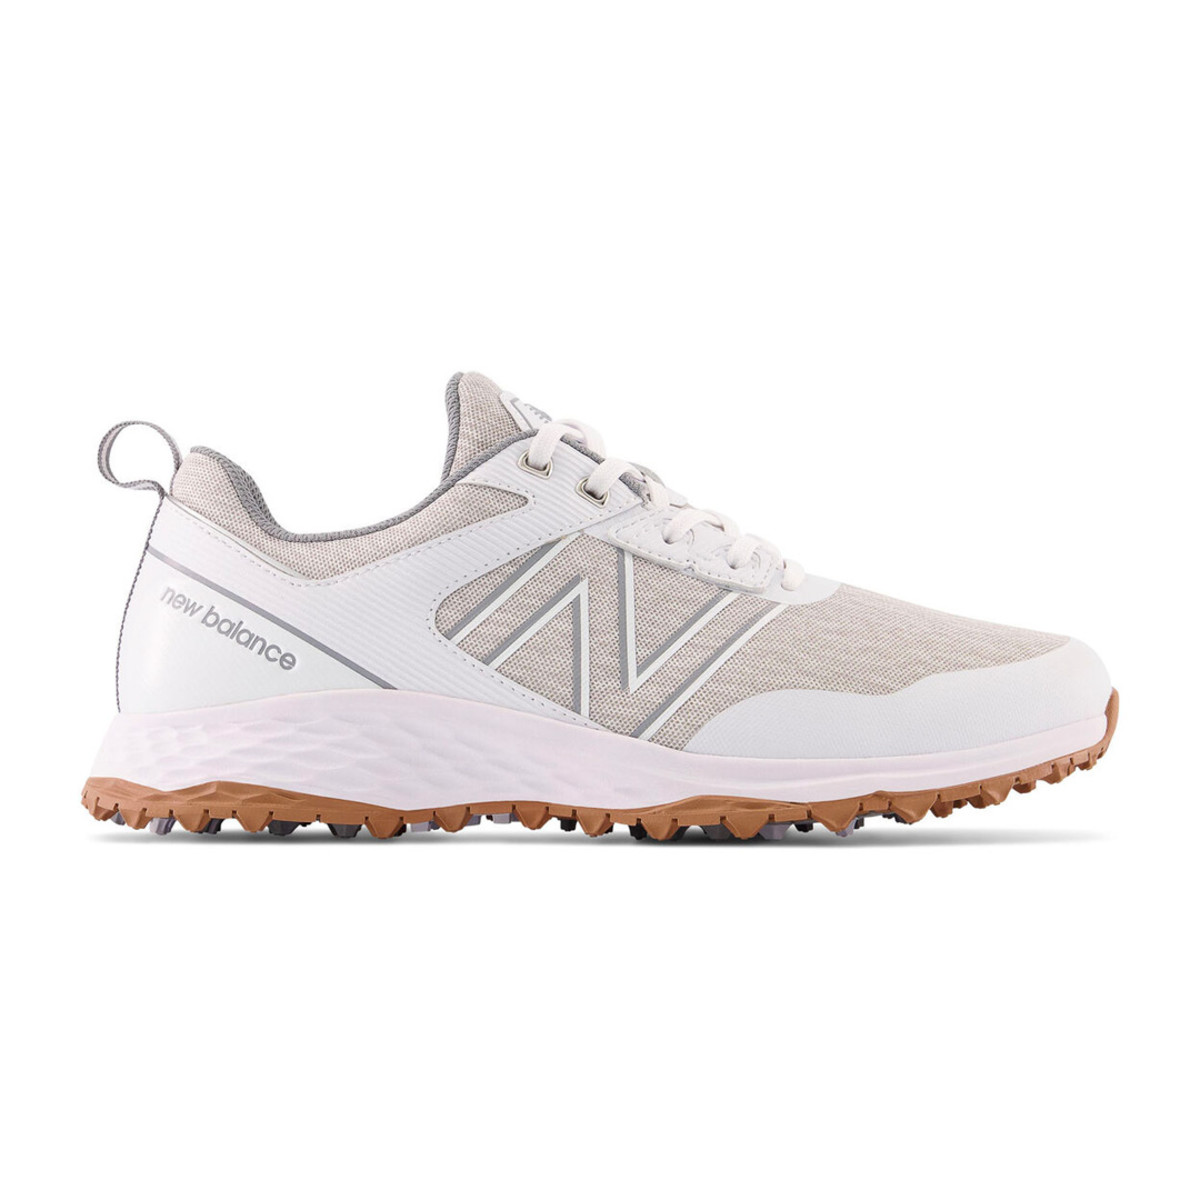 the new balance fresh foam contend sl golf shoes, seen here in white, are on sale at pga tour superstore